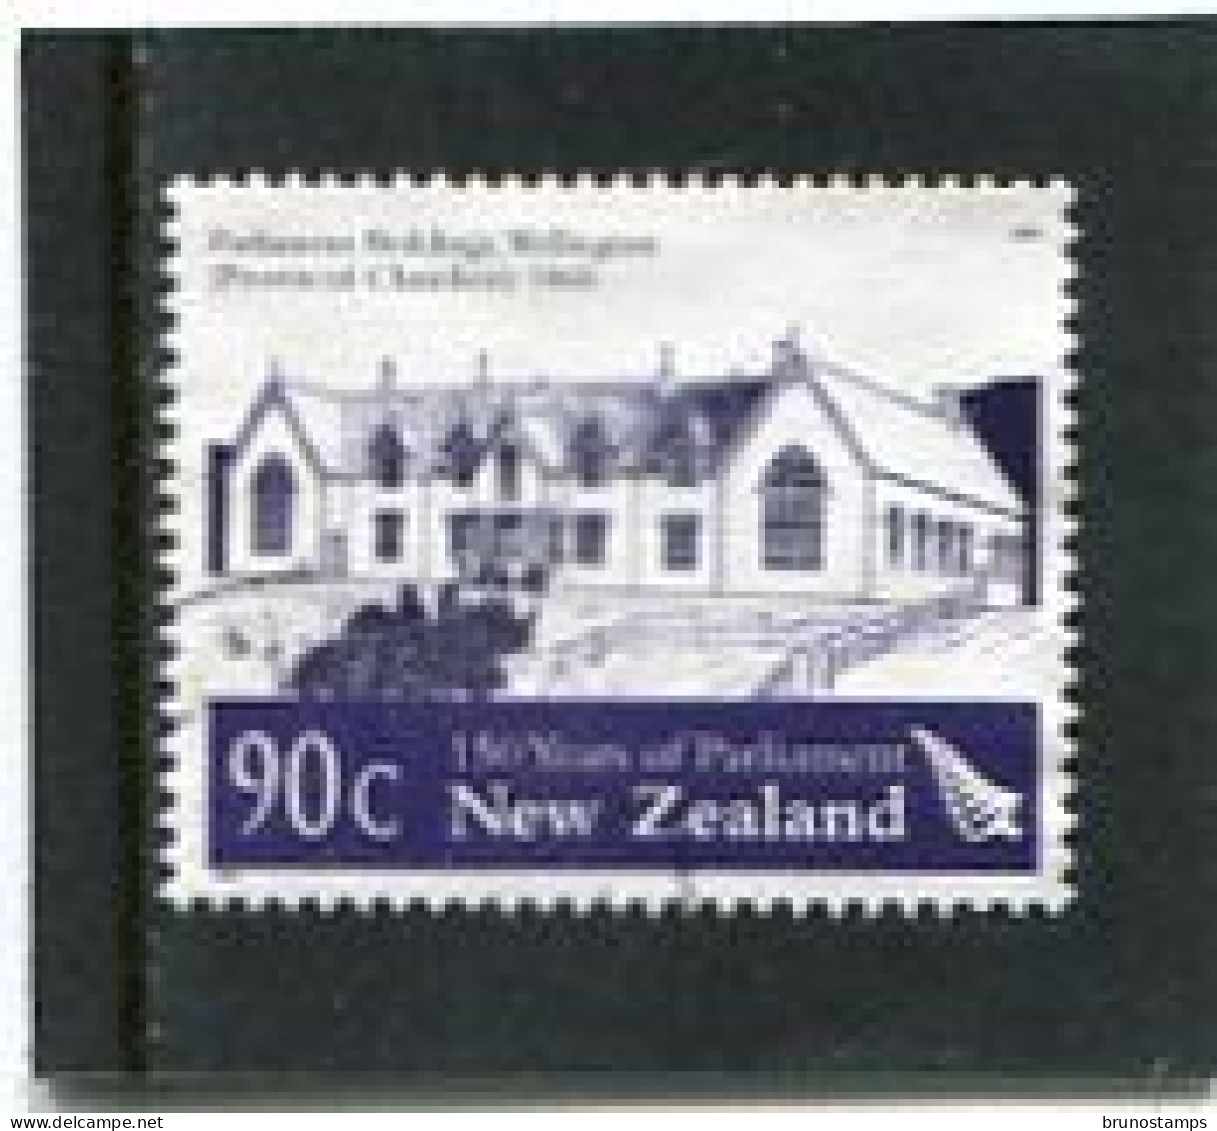 NEW ZEALAND - 2004  90c  PARLIAMENT  FINE  USED - Used Stamps